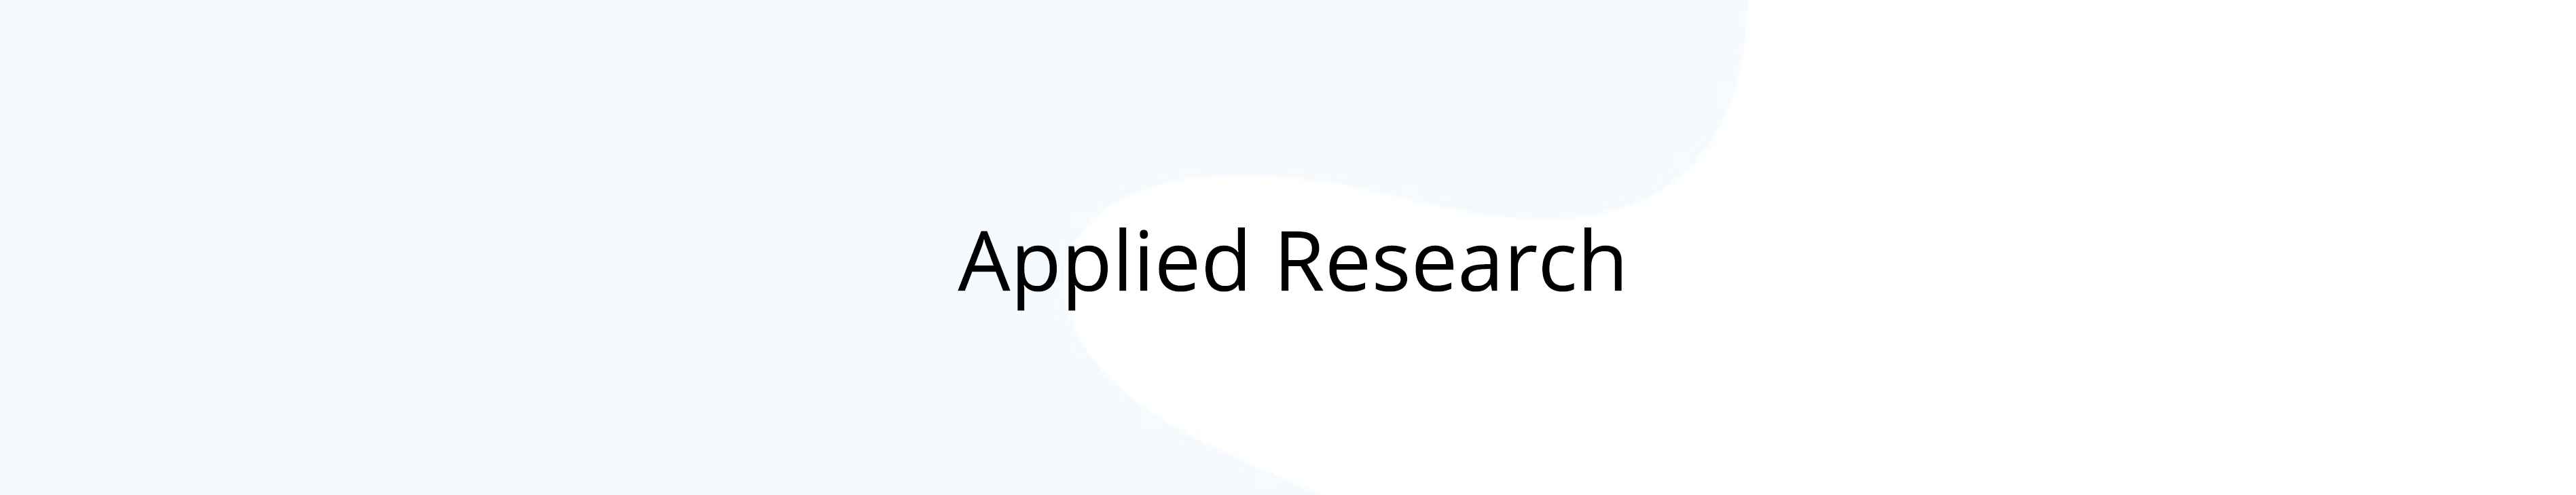 Applied Research